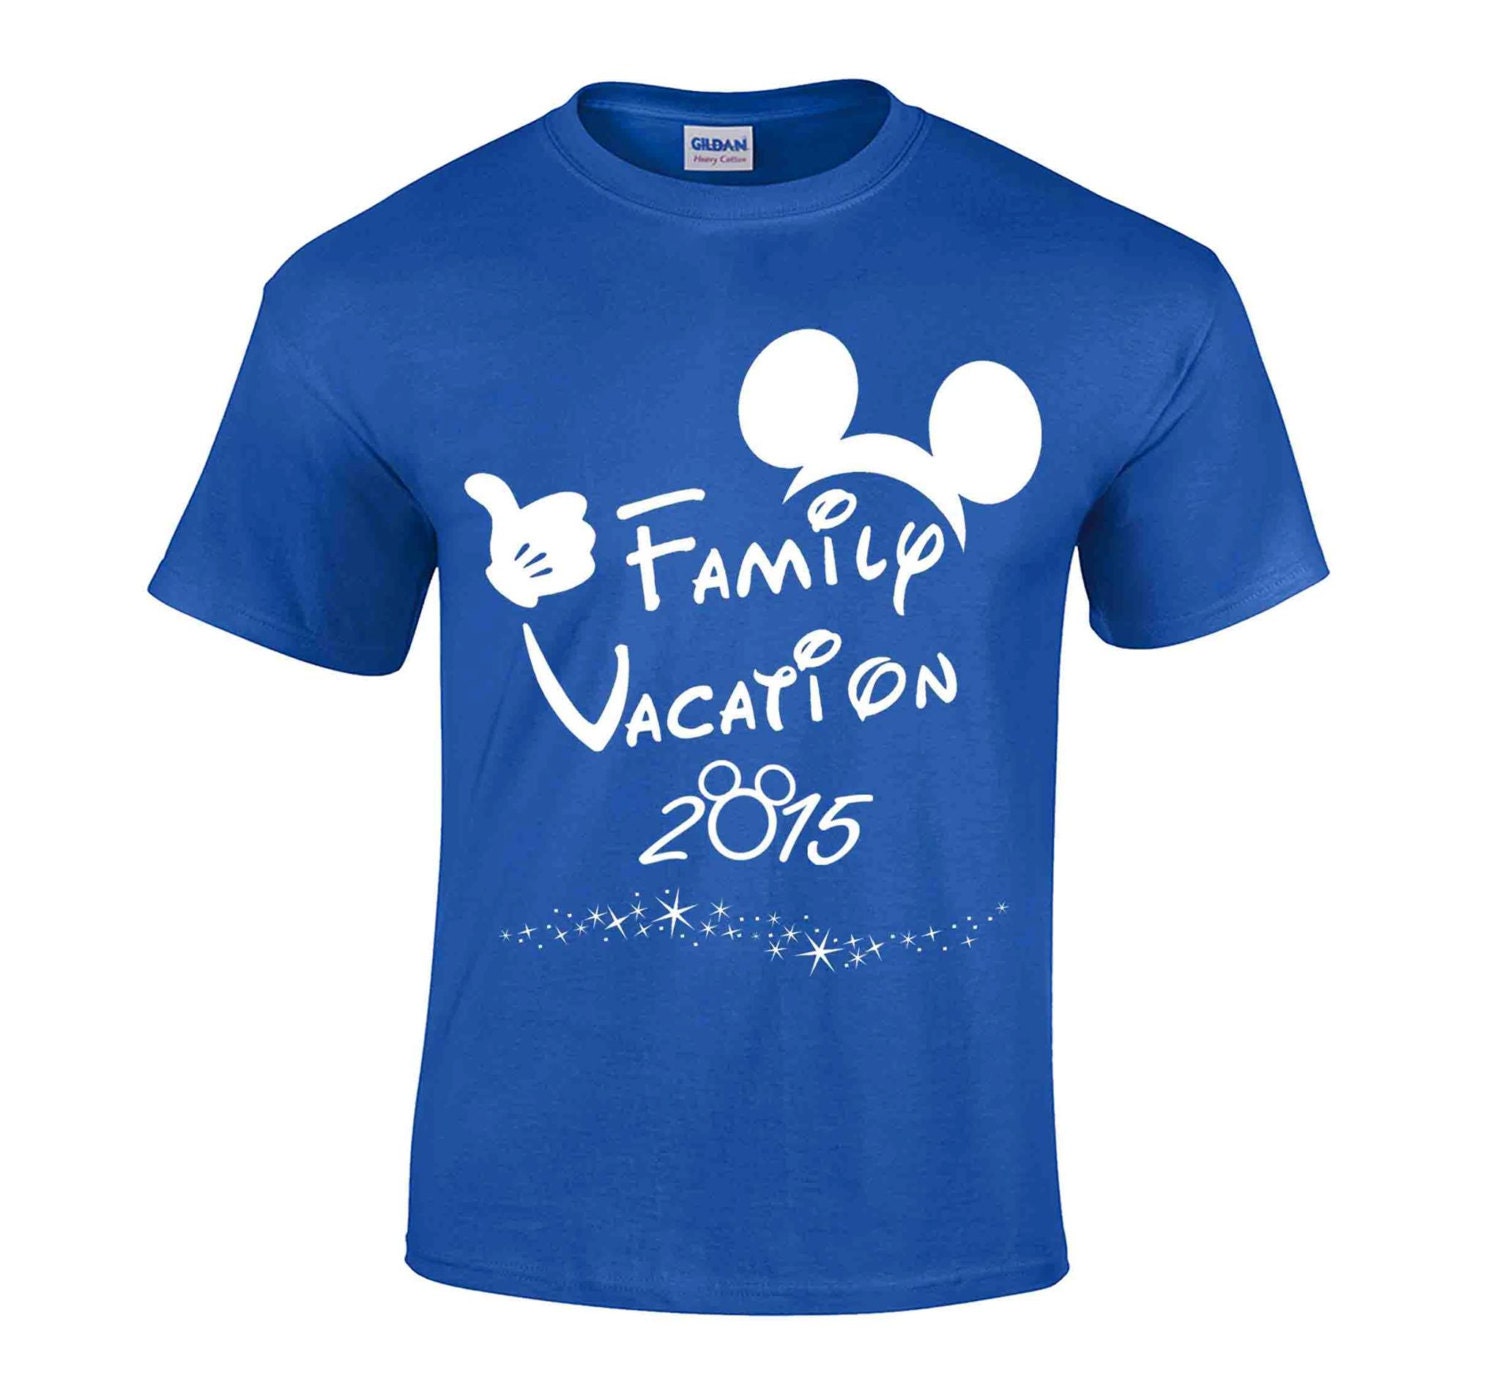 2015 Disney Family Vacation T-Shirts by theperfectnumber on Etsy